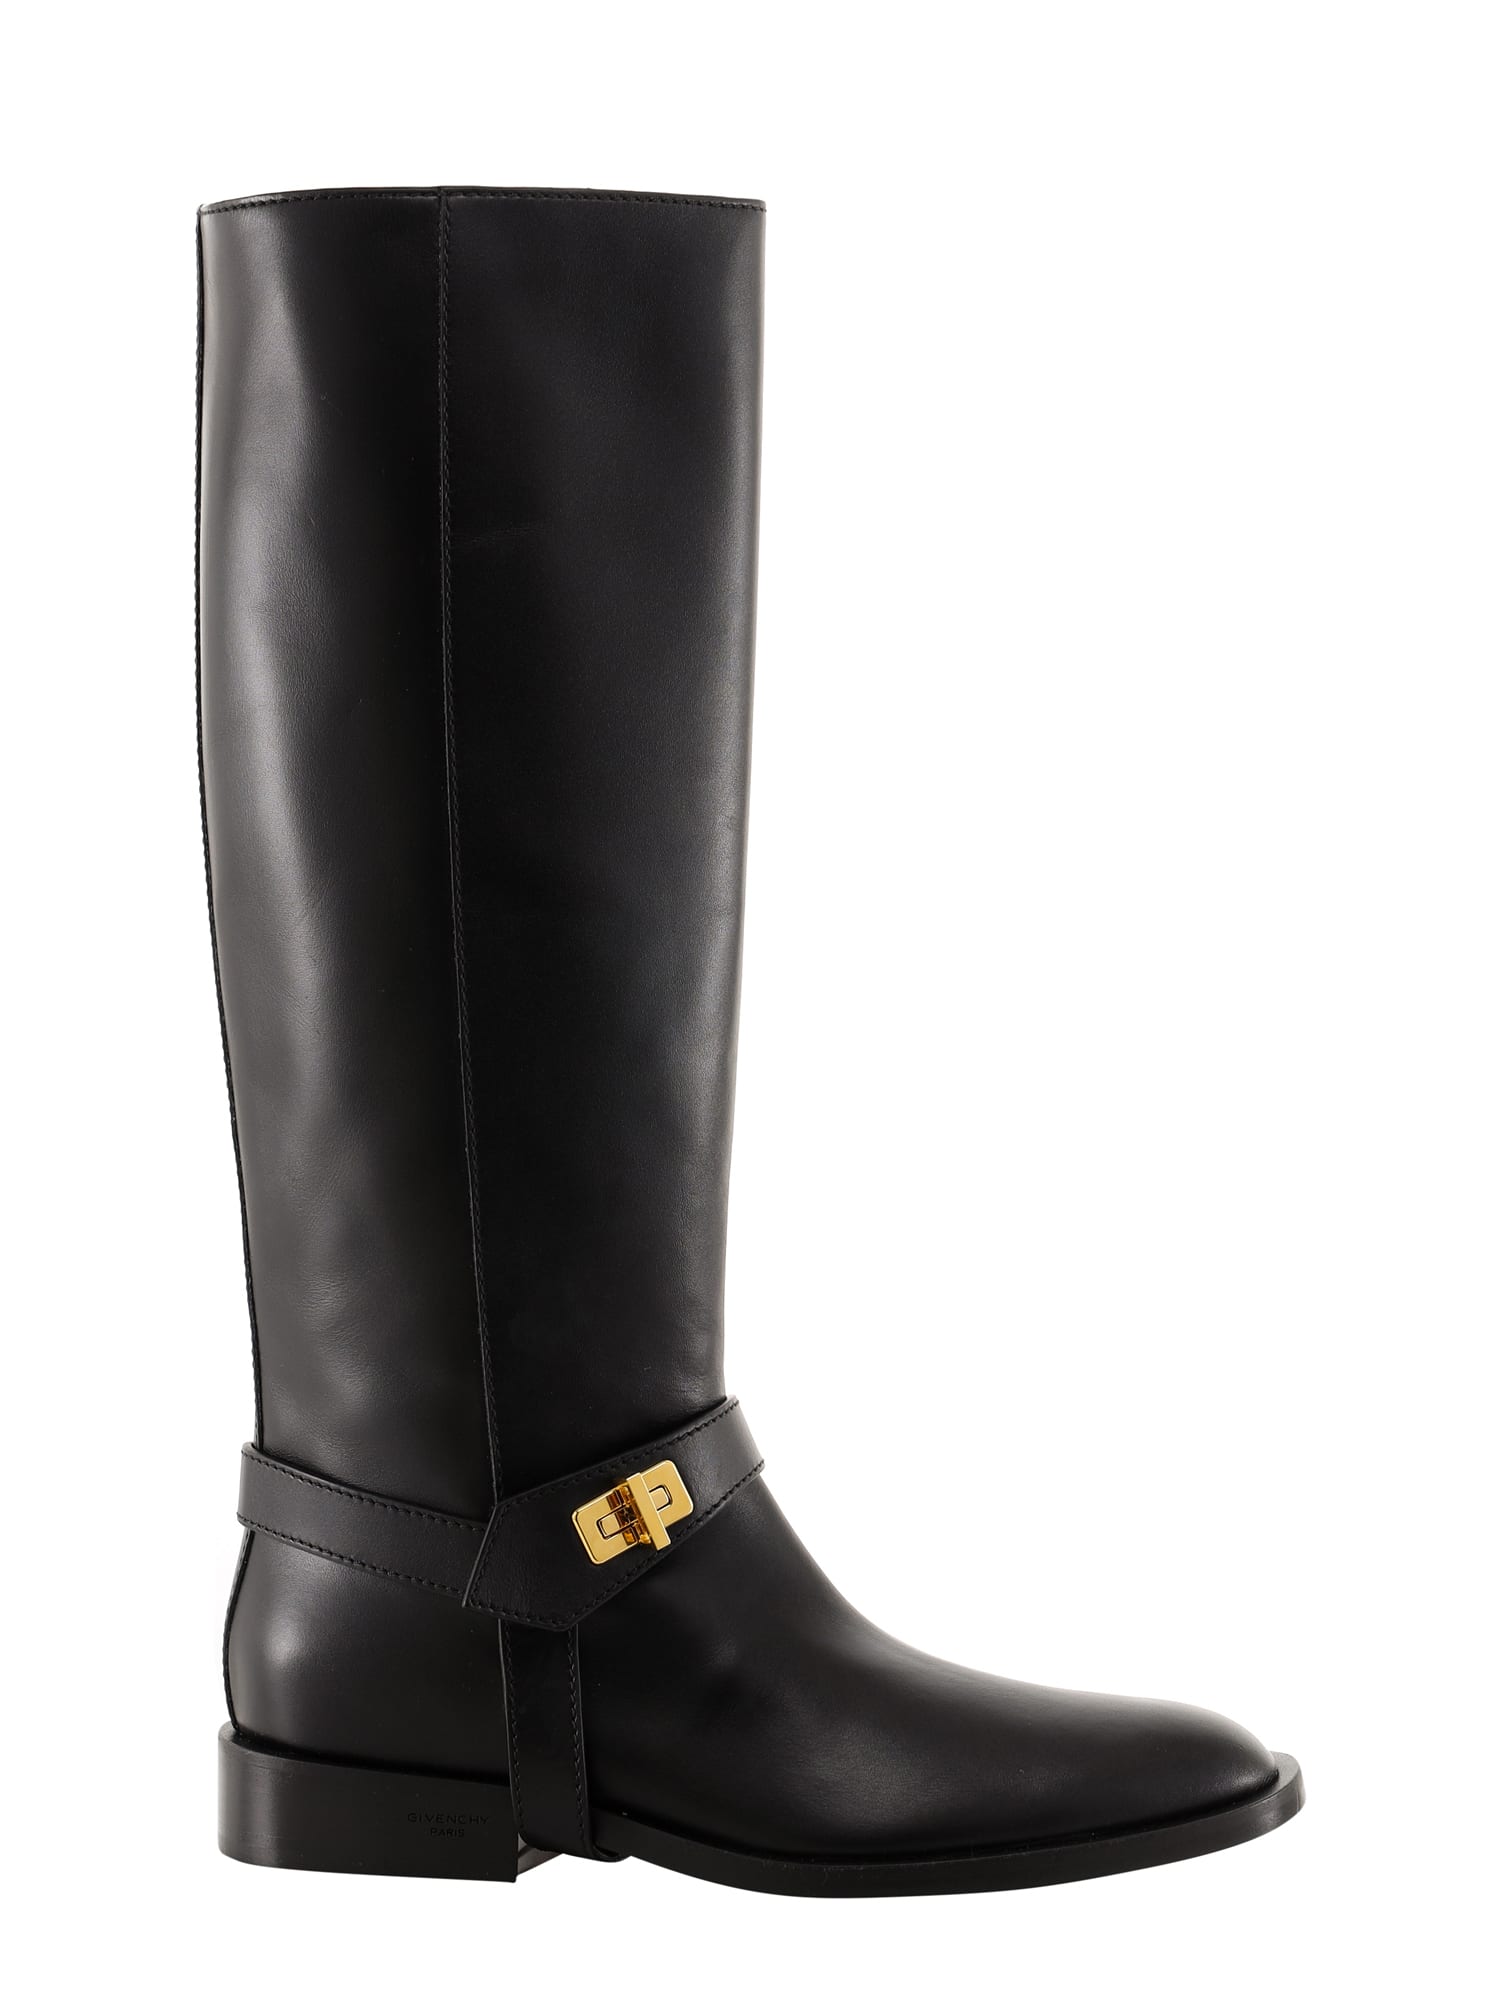 Buy Givenchy Calf Leather Riding Boots online, shop Givenchy shoes with free shipping